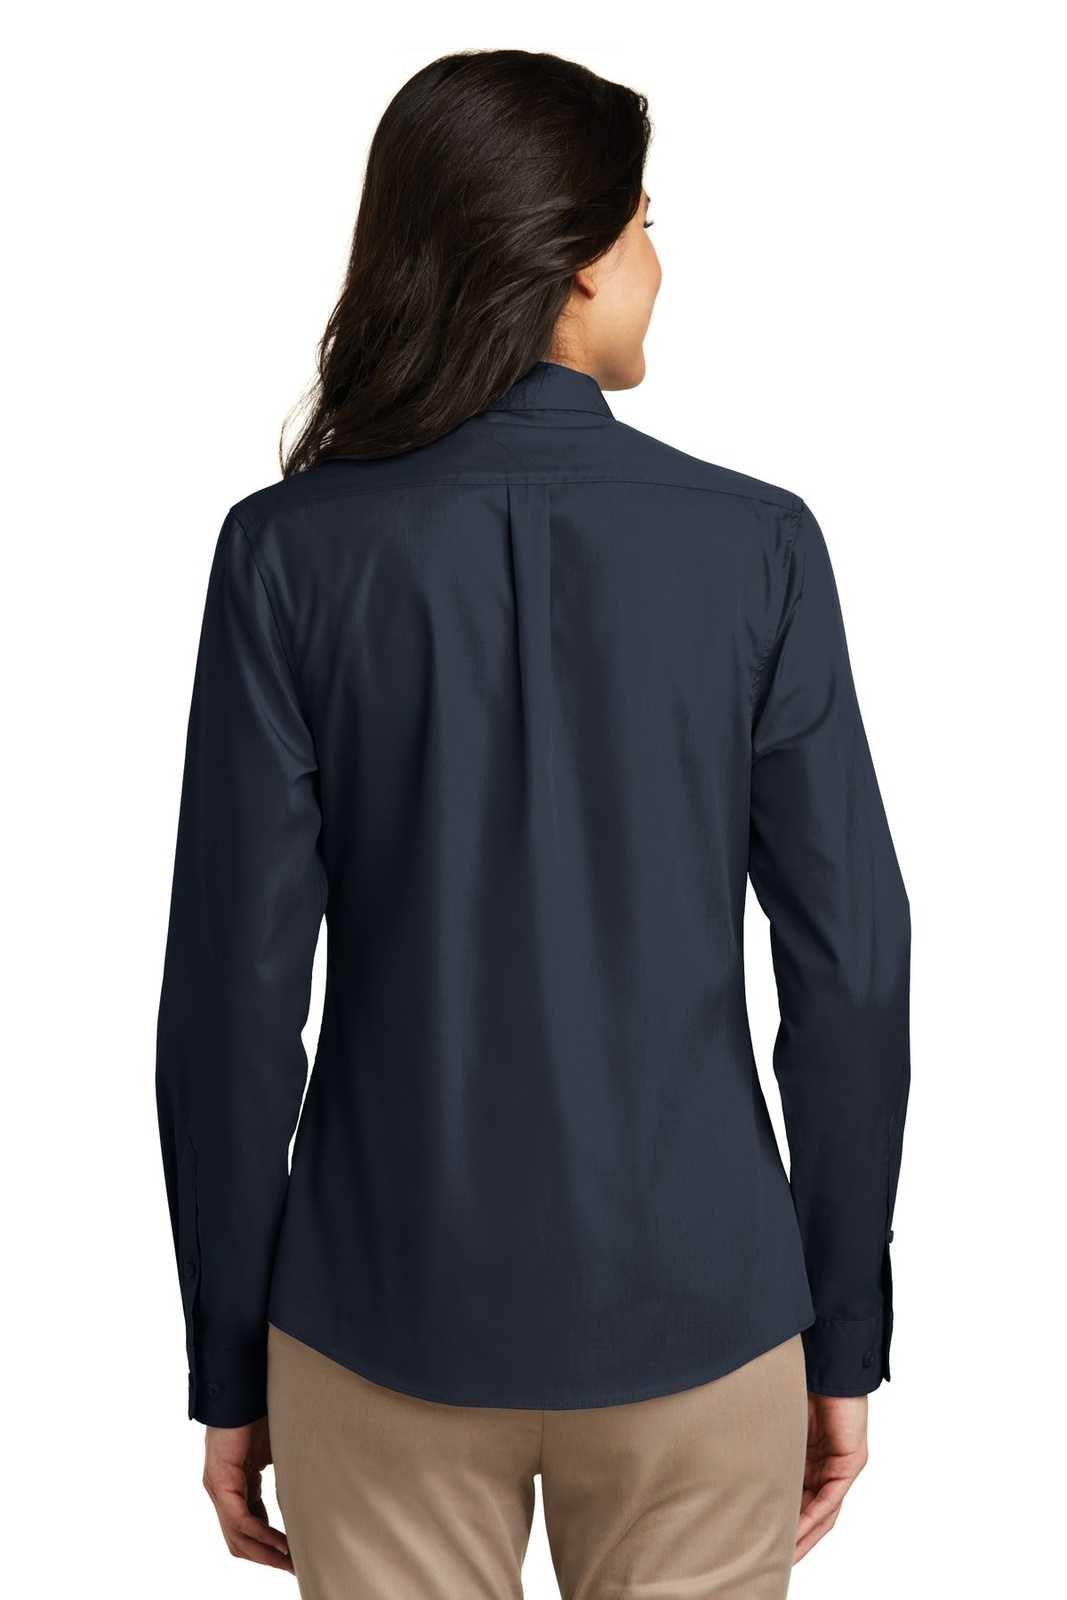 Port Authority LW100 Ladies Long Sleeve Carefree Poplin Shirt - River Blue Navy - HIT a Double - 1